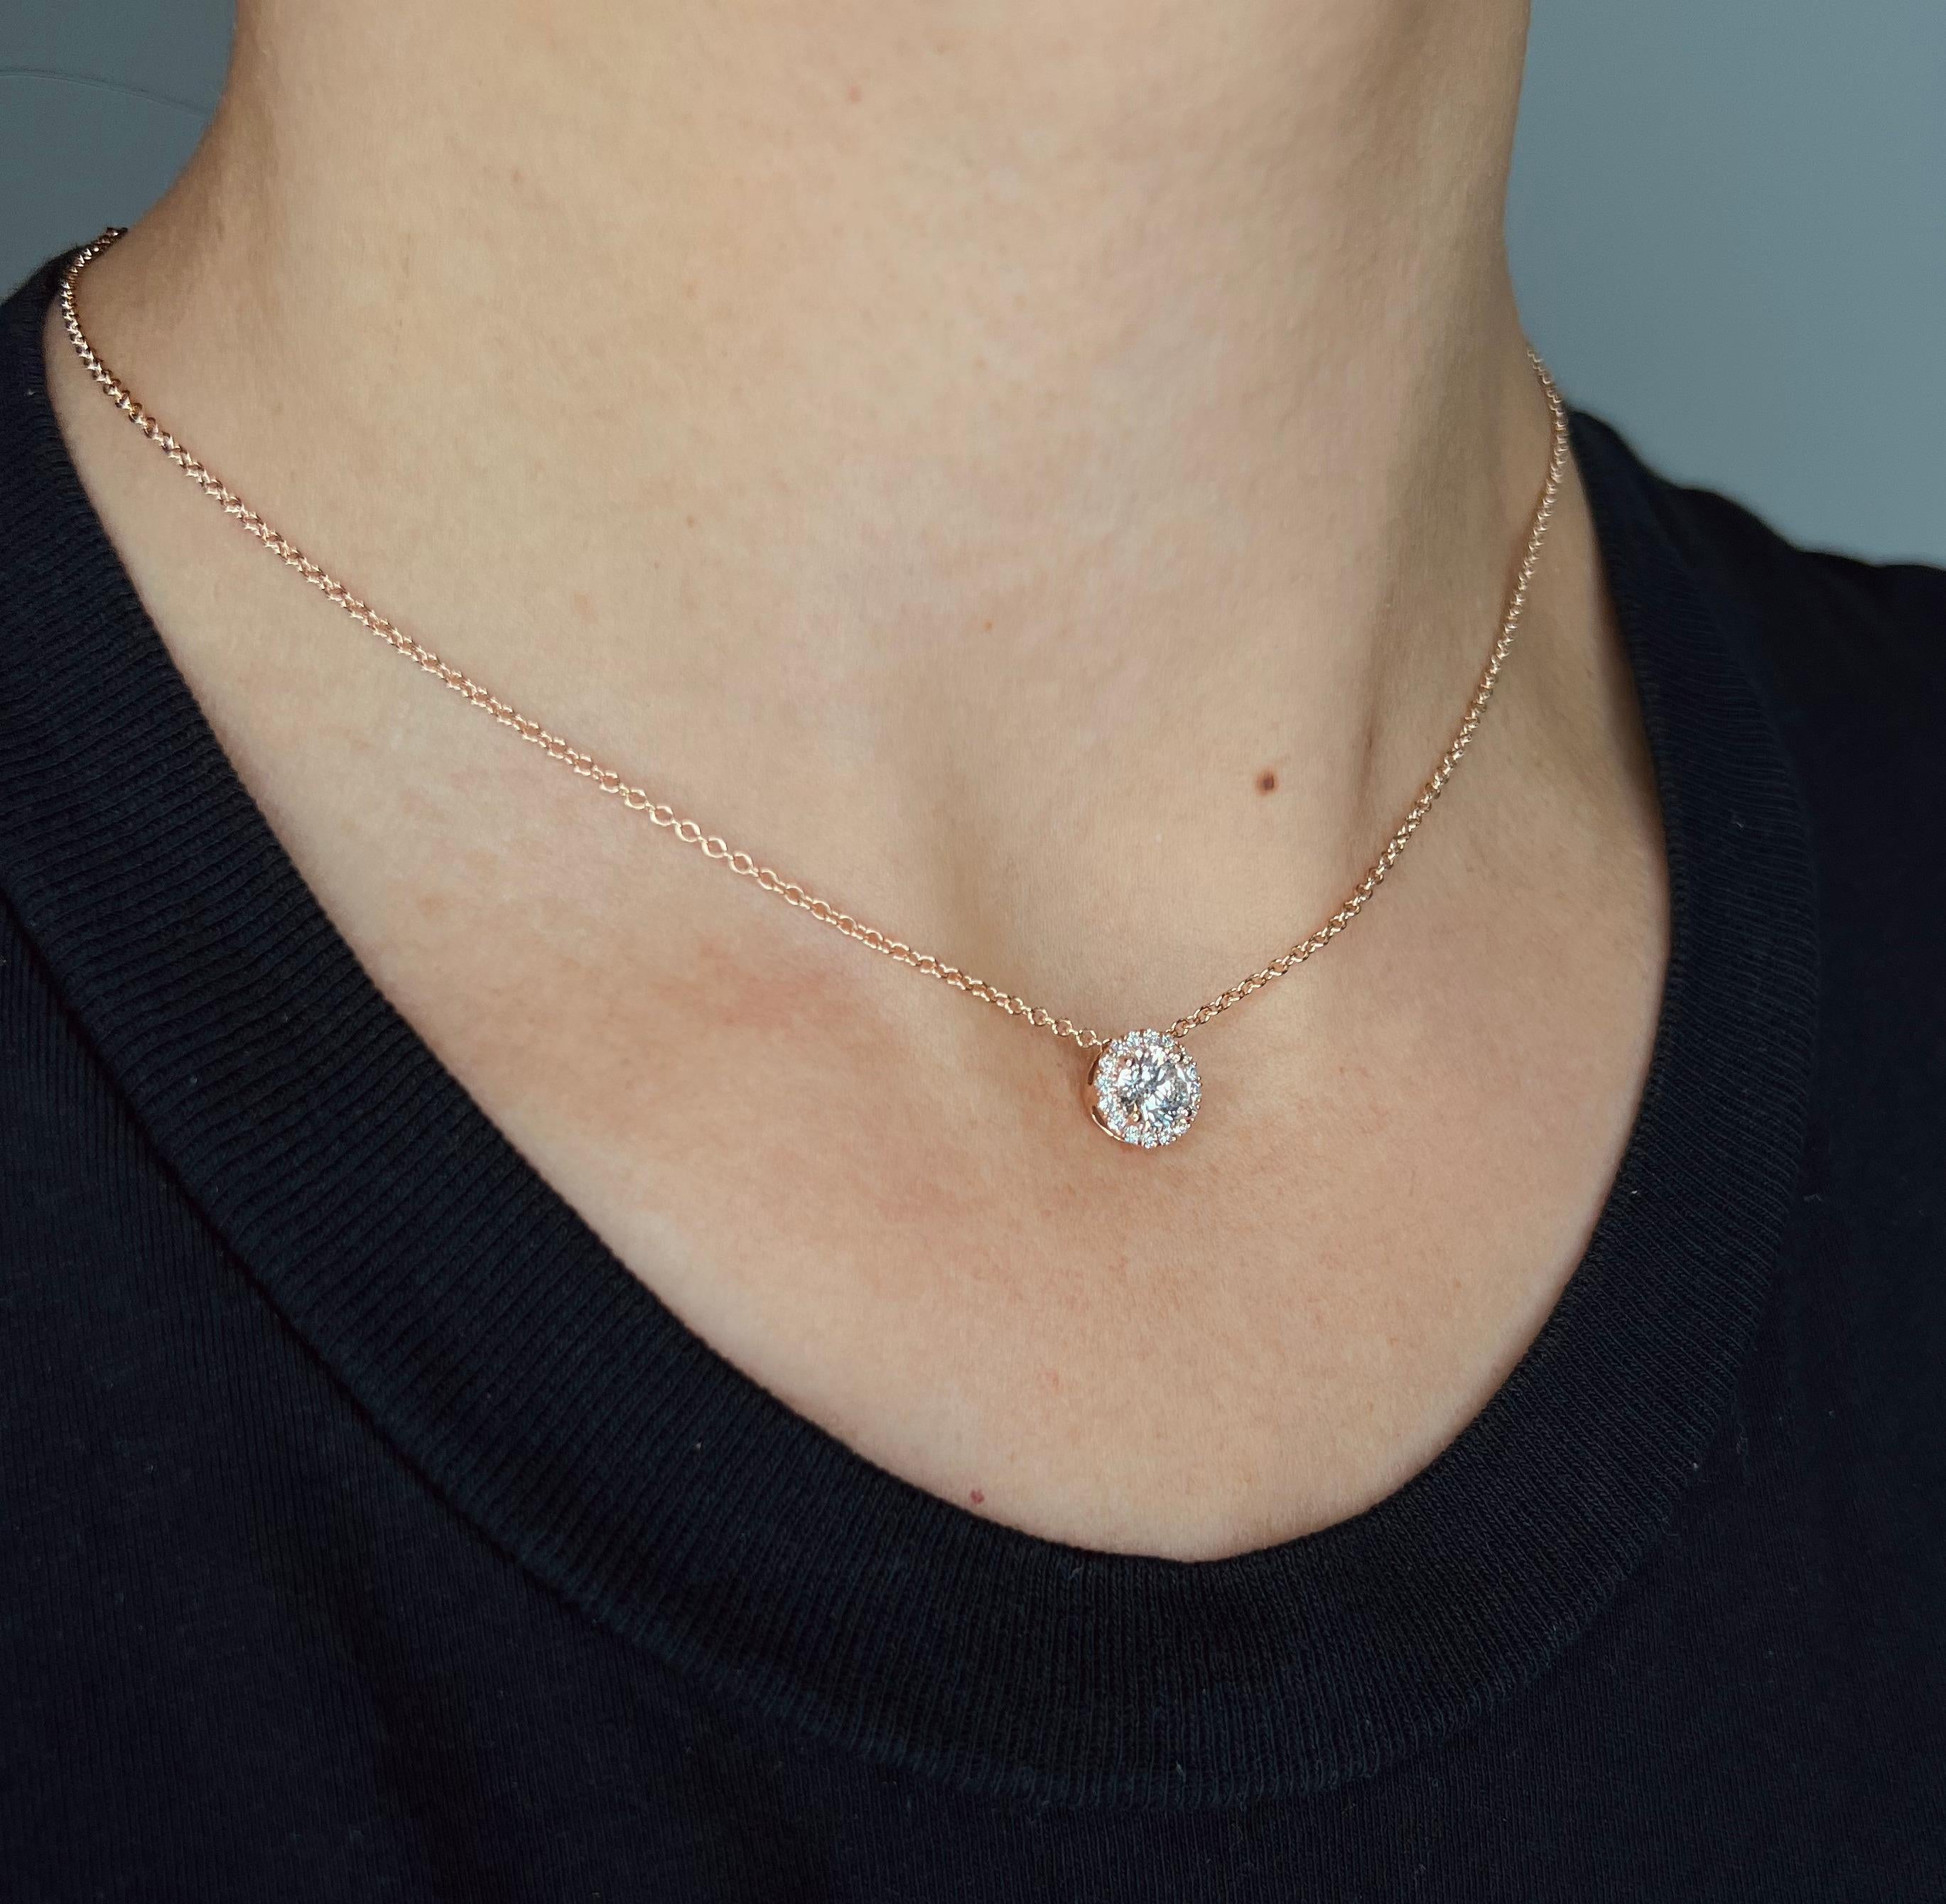 This diamond circle pendant provides a glowing chic look.
Metal: 14k Gold
Diamond Total Carats (Includes 0.15ct halo): 0.40 Total (.25ct Center) 
Diamond Cut: Round Natural Diamonds (Not Lab Grown)
Diamond Clarity: VS
Diamond Color: F
Color: White